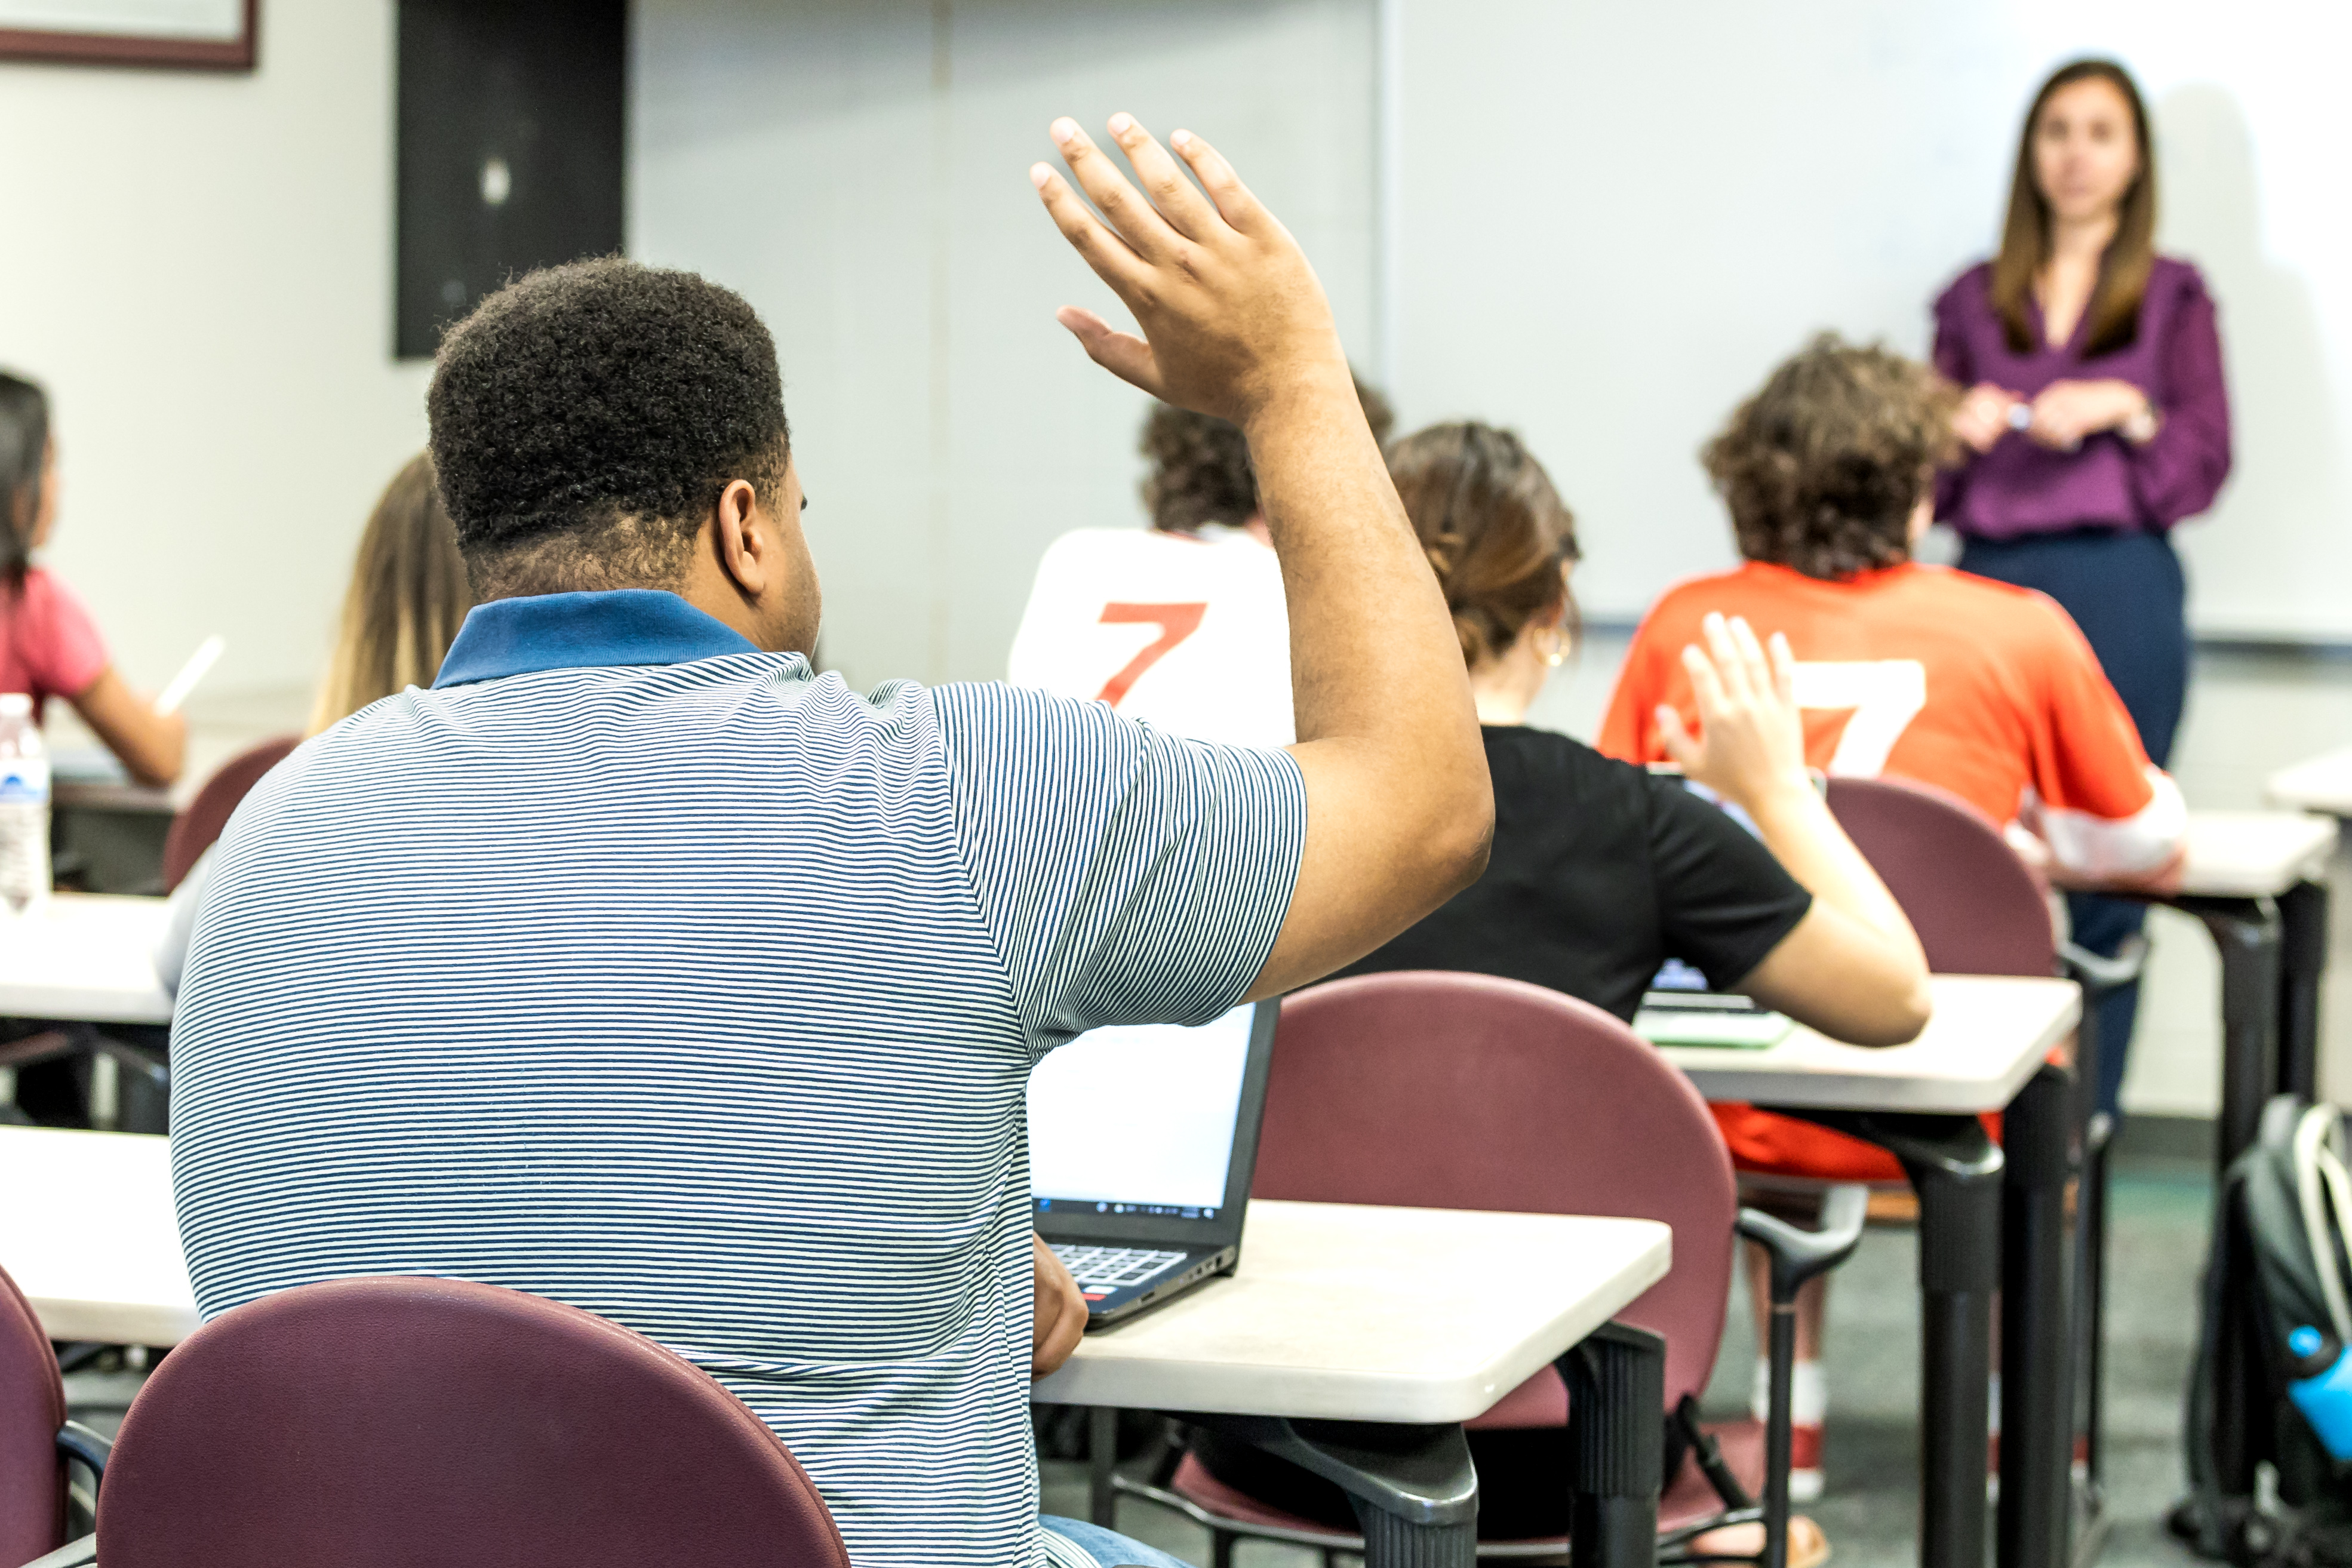 Student raises their hand in class.